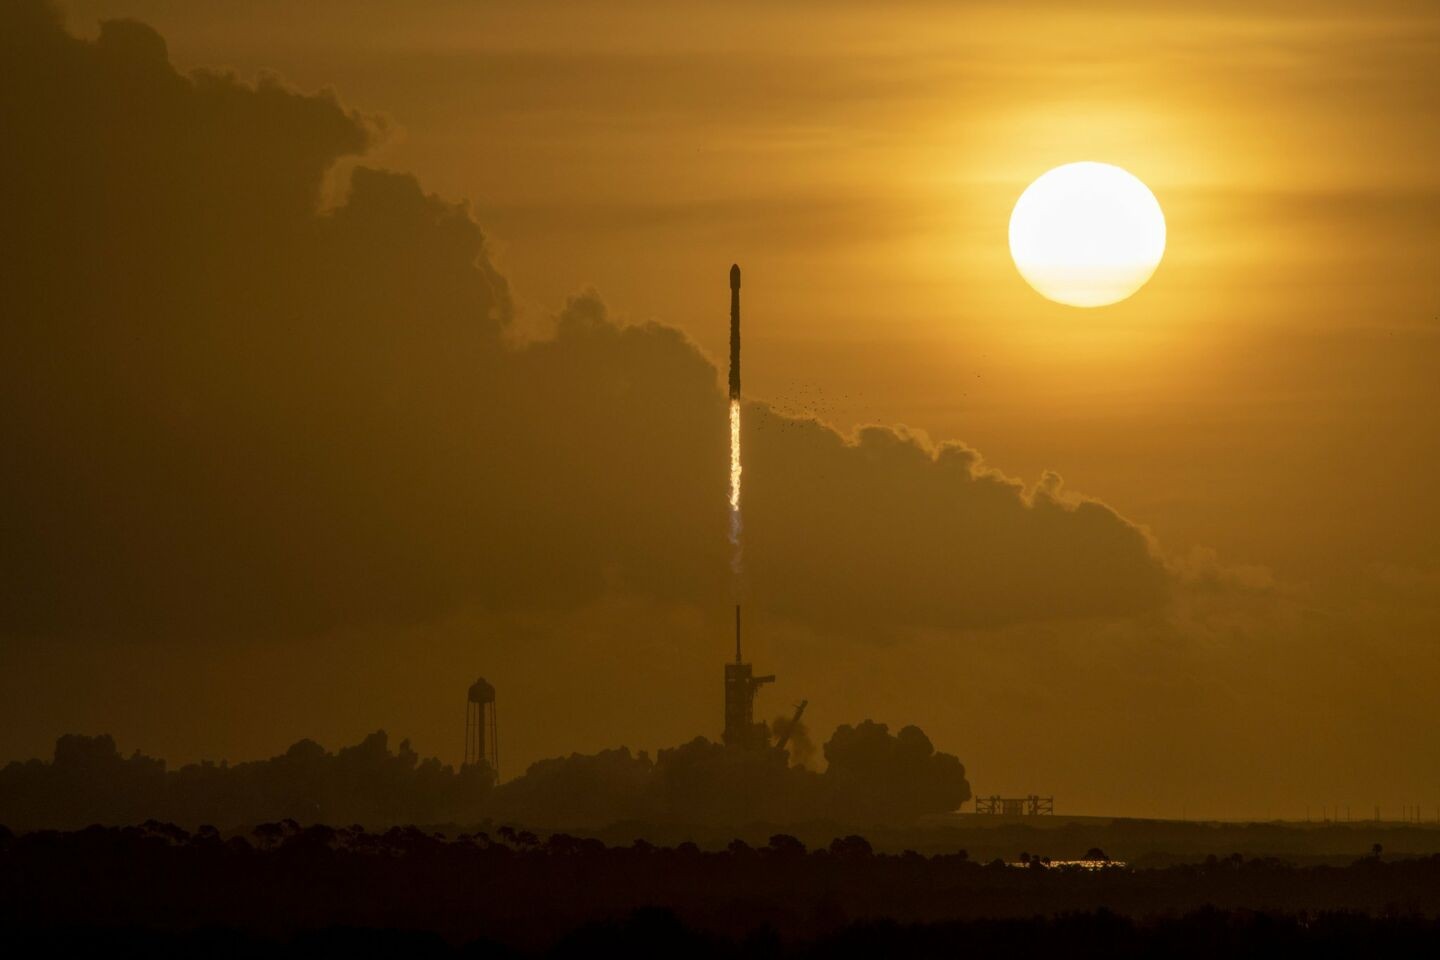 SpaceX plans to break its launch record in 2022 